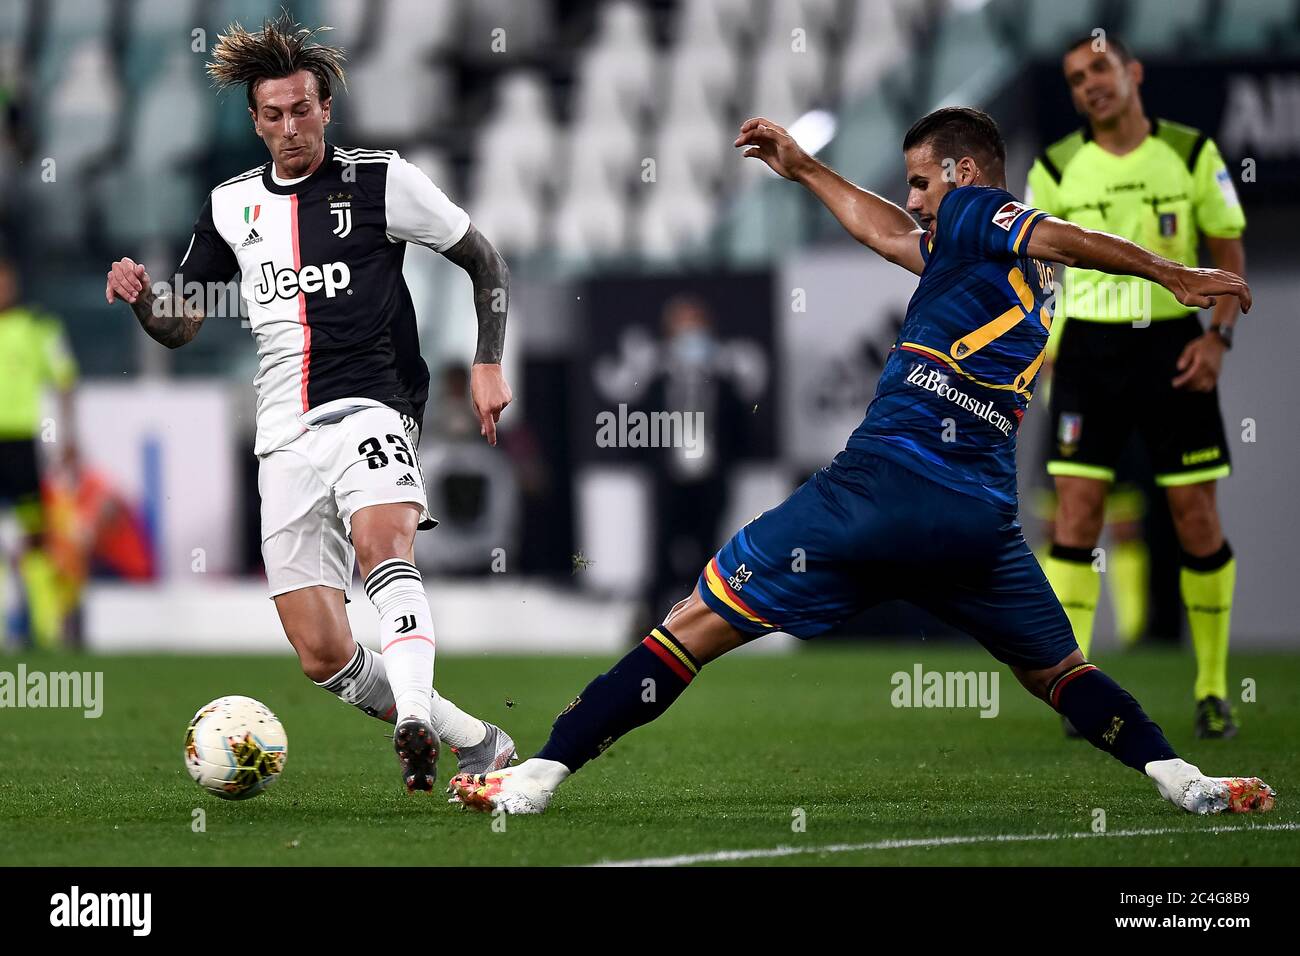 Turin, Italy. 26th June, 2020. TURIN, ITALY - June 26, 2020: Federico Bernardeschi of Juventus FC is tackled by Panagiotis Tachtsidis of US Lecce during the Serie A football match between Juventus FC and US Lecce. Juventus FC won 4-0 over US Lecce. (Photo by Nicolò Campo/Sipa USA) Credit: Sipa USA/Alamy Live News Stock Photo